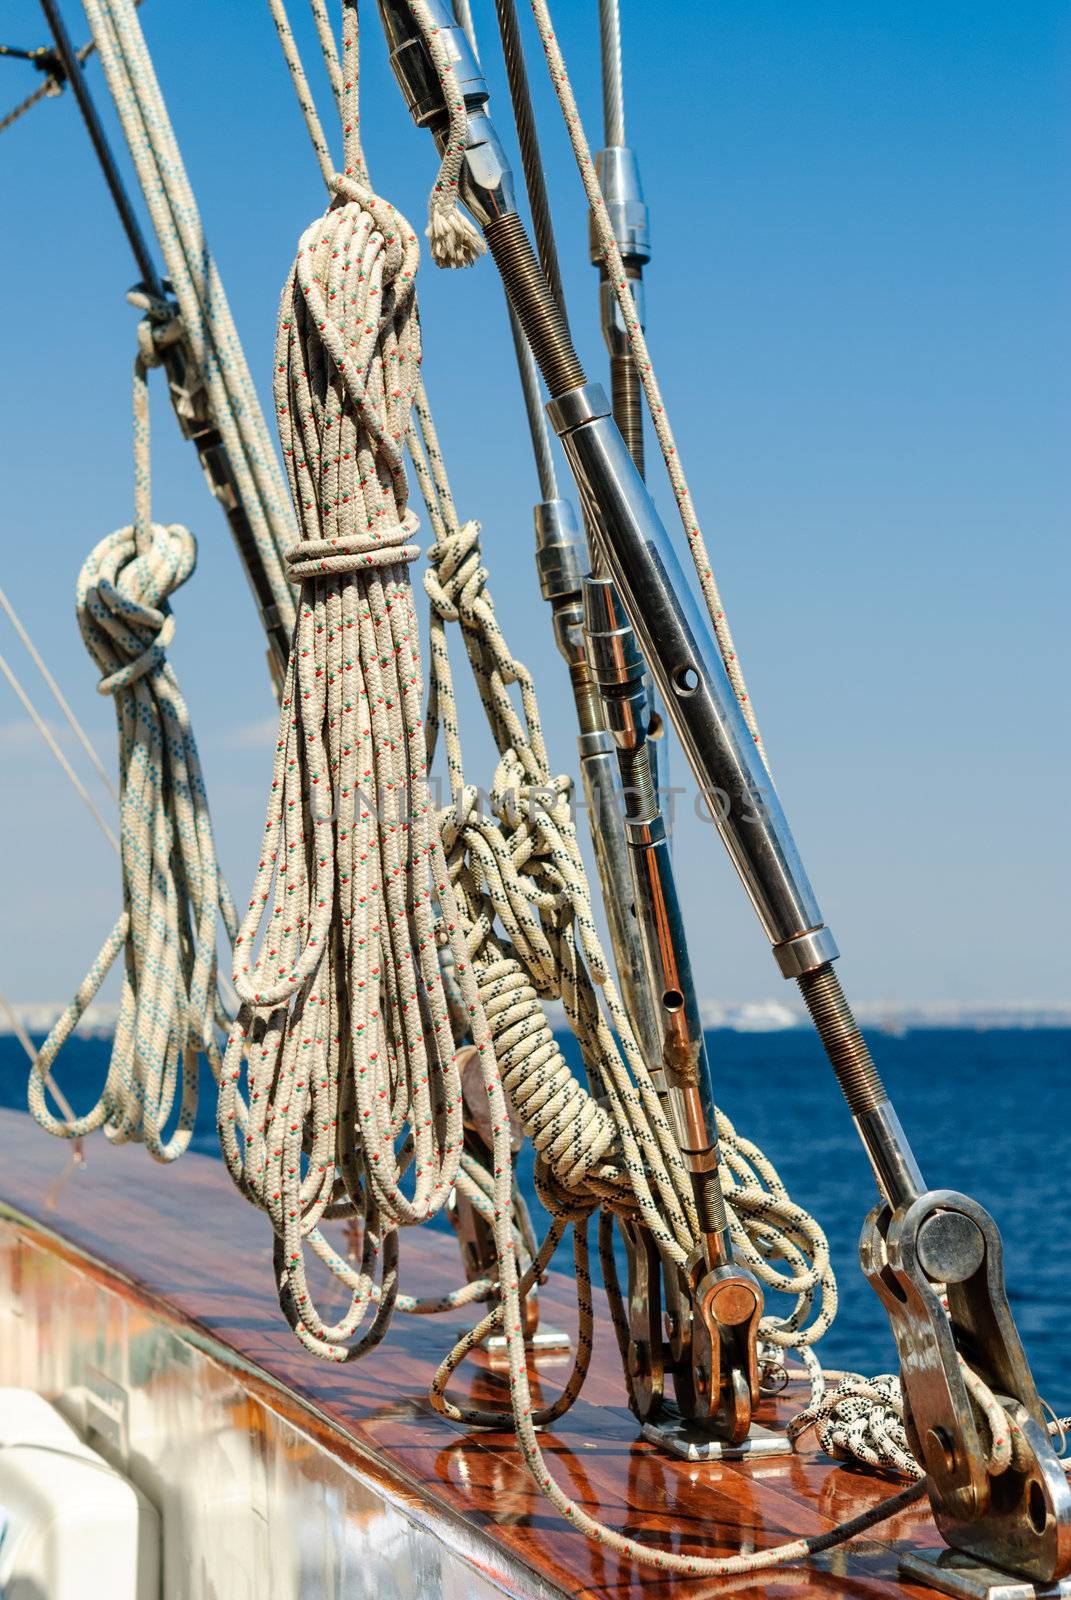 Rigging of an luxury sailing vessel